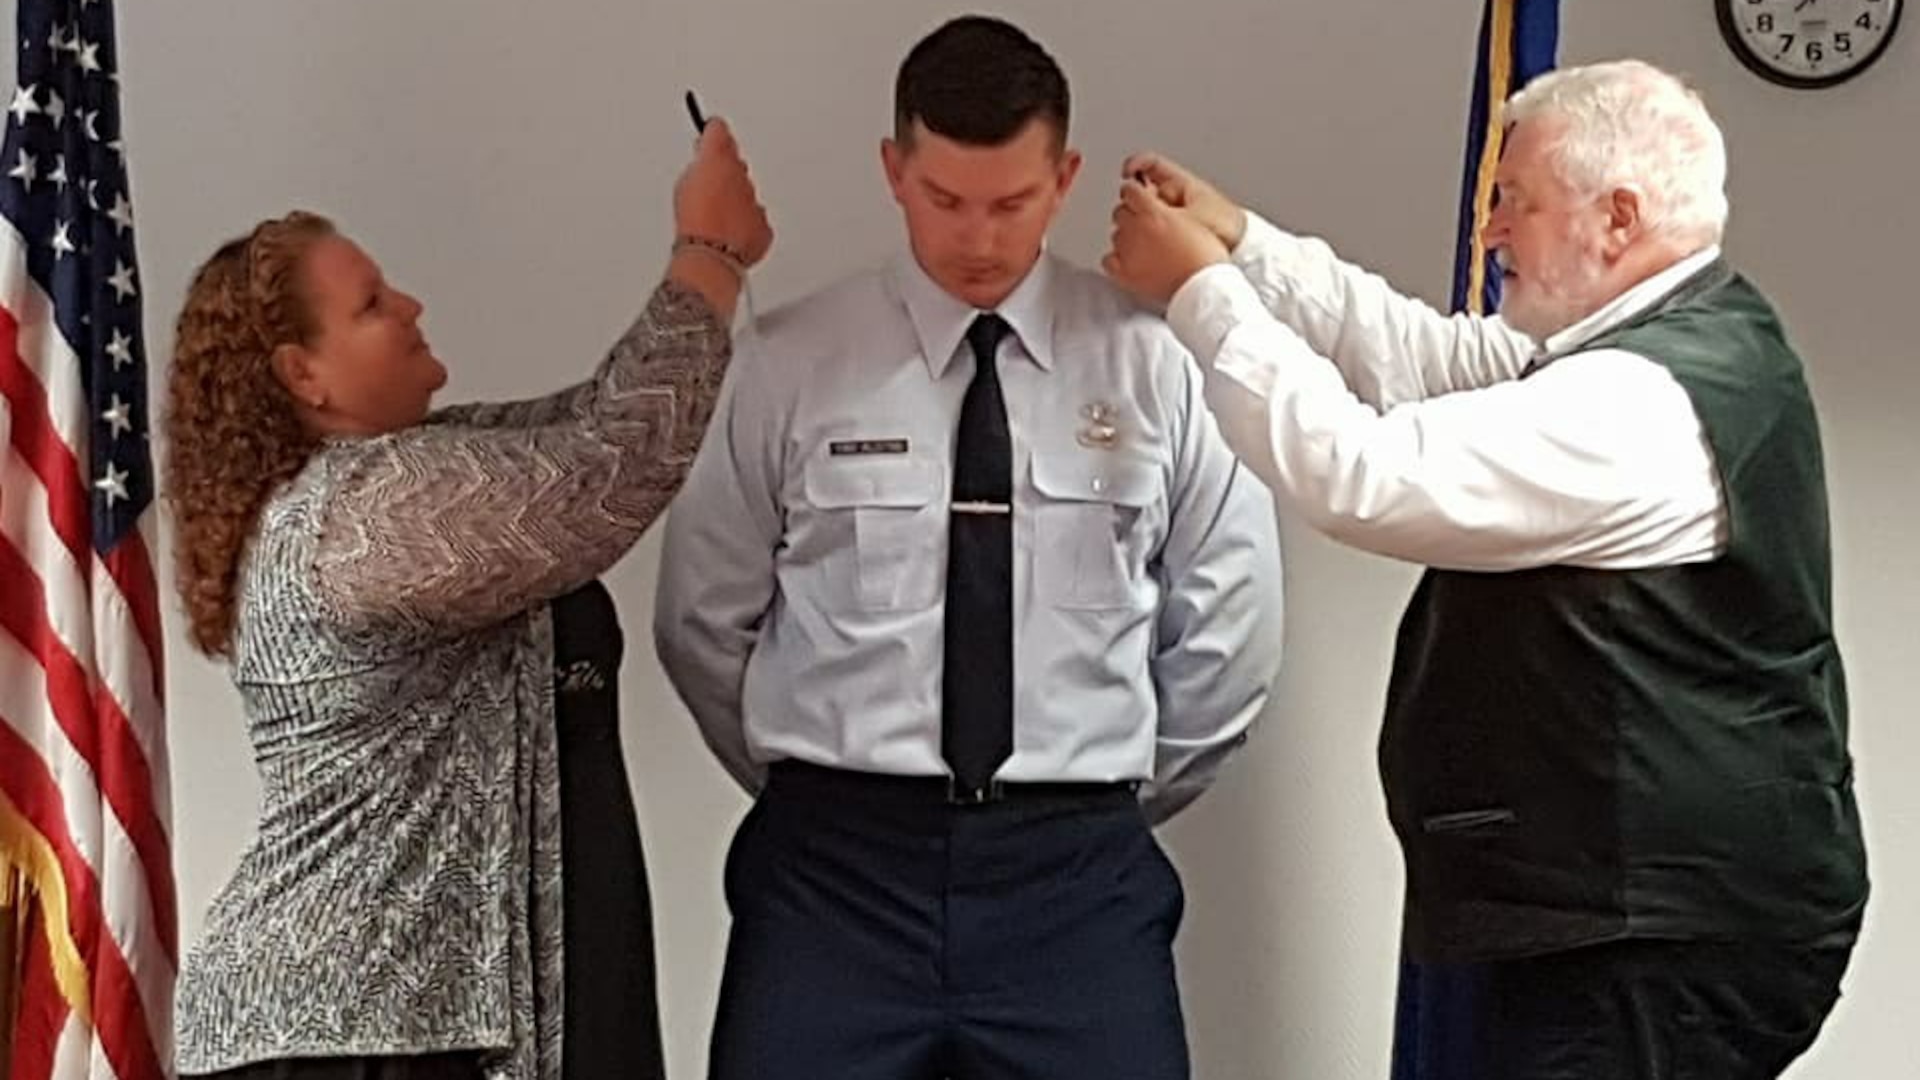 Man in uniform stands with head bowed as a woman to his left and a man to his right make adjustments to his uniform.